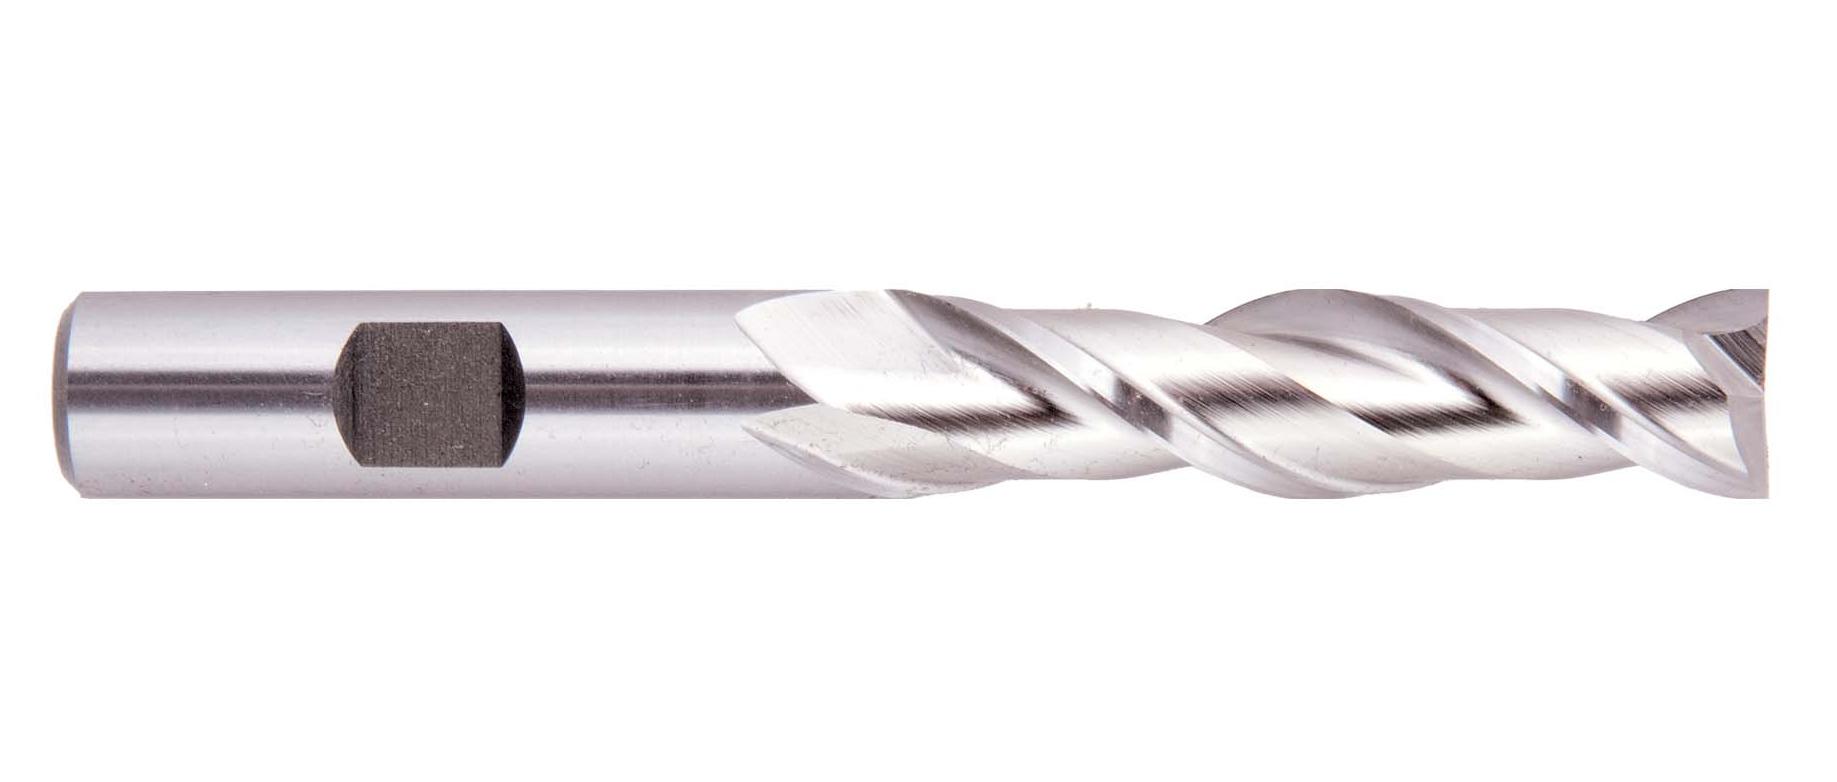 90° Point Angle 2.5000 OAL 2 Flutes .7500 Flute Length 30° Helix Angle Bright Uncoated RedLine Tools RDM20316 .2500 Shank Diameter Carbide Drill Mill .2500 1/4 1/4 